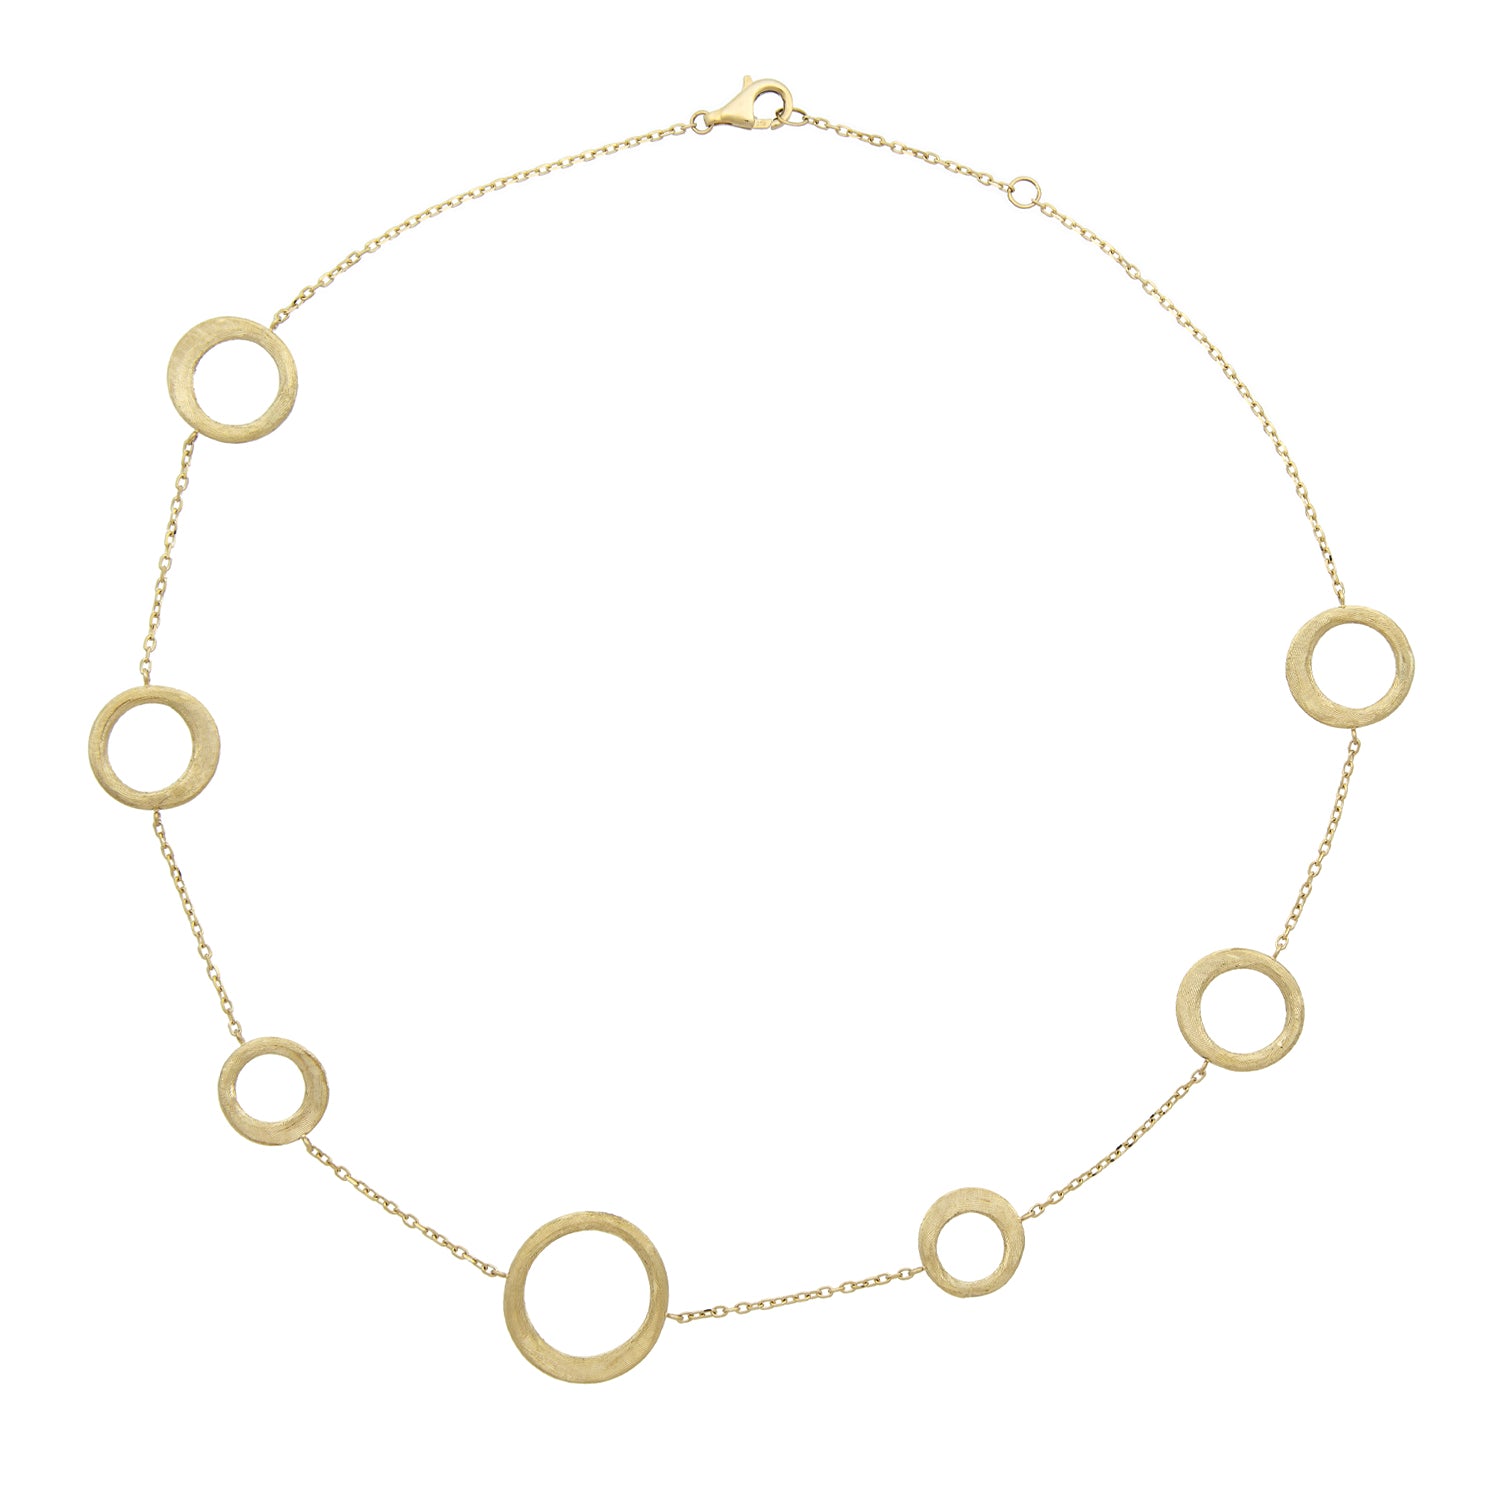 Yellow gold matted necklace